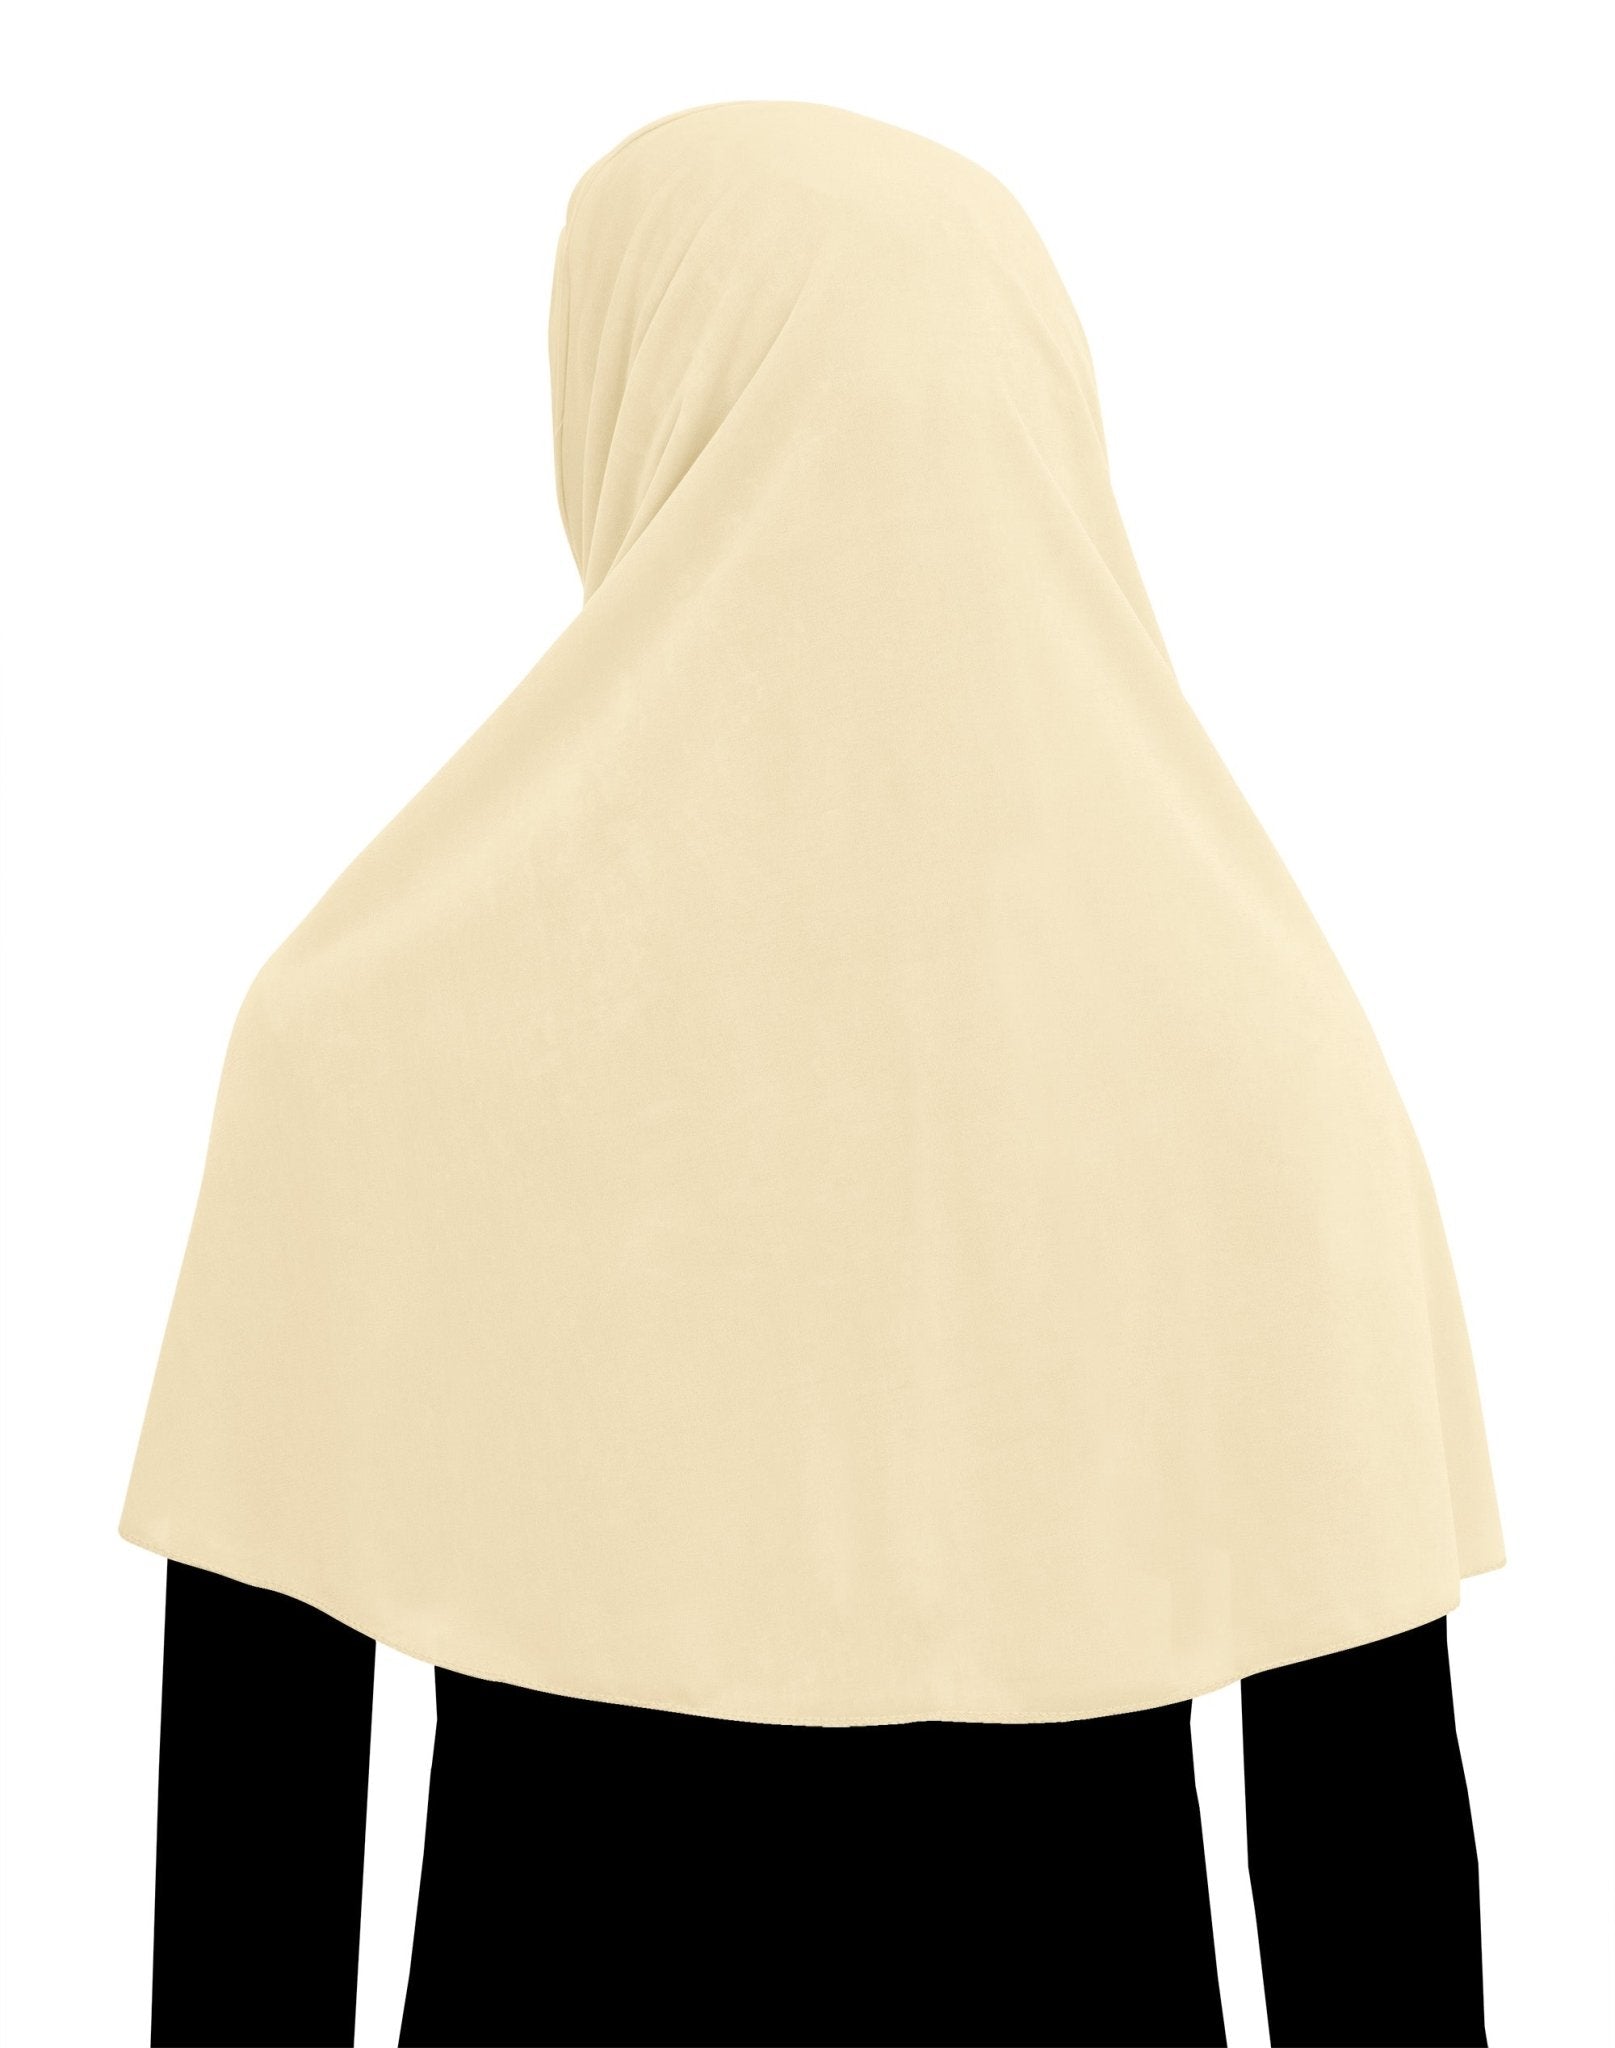 prayer khimar hijab in ivory off white or cream elbow length lycra headscarf for women